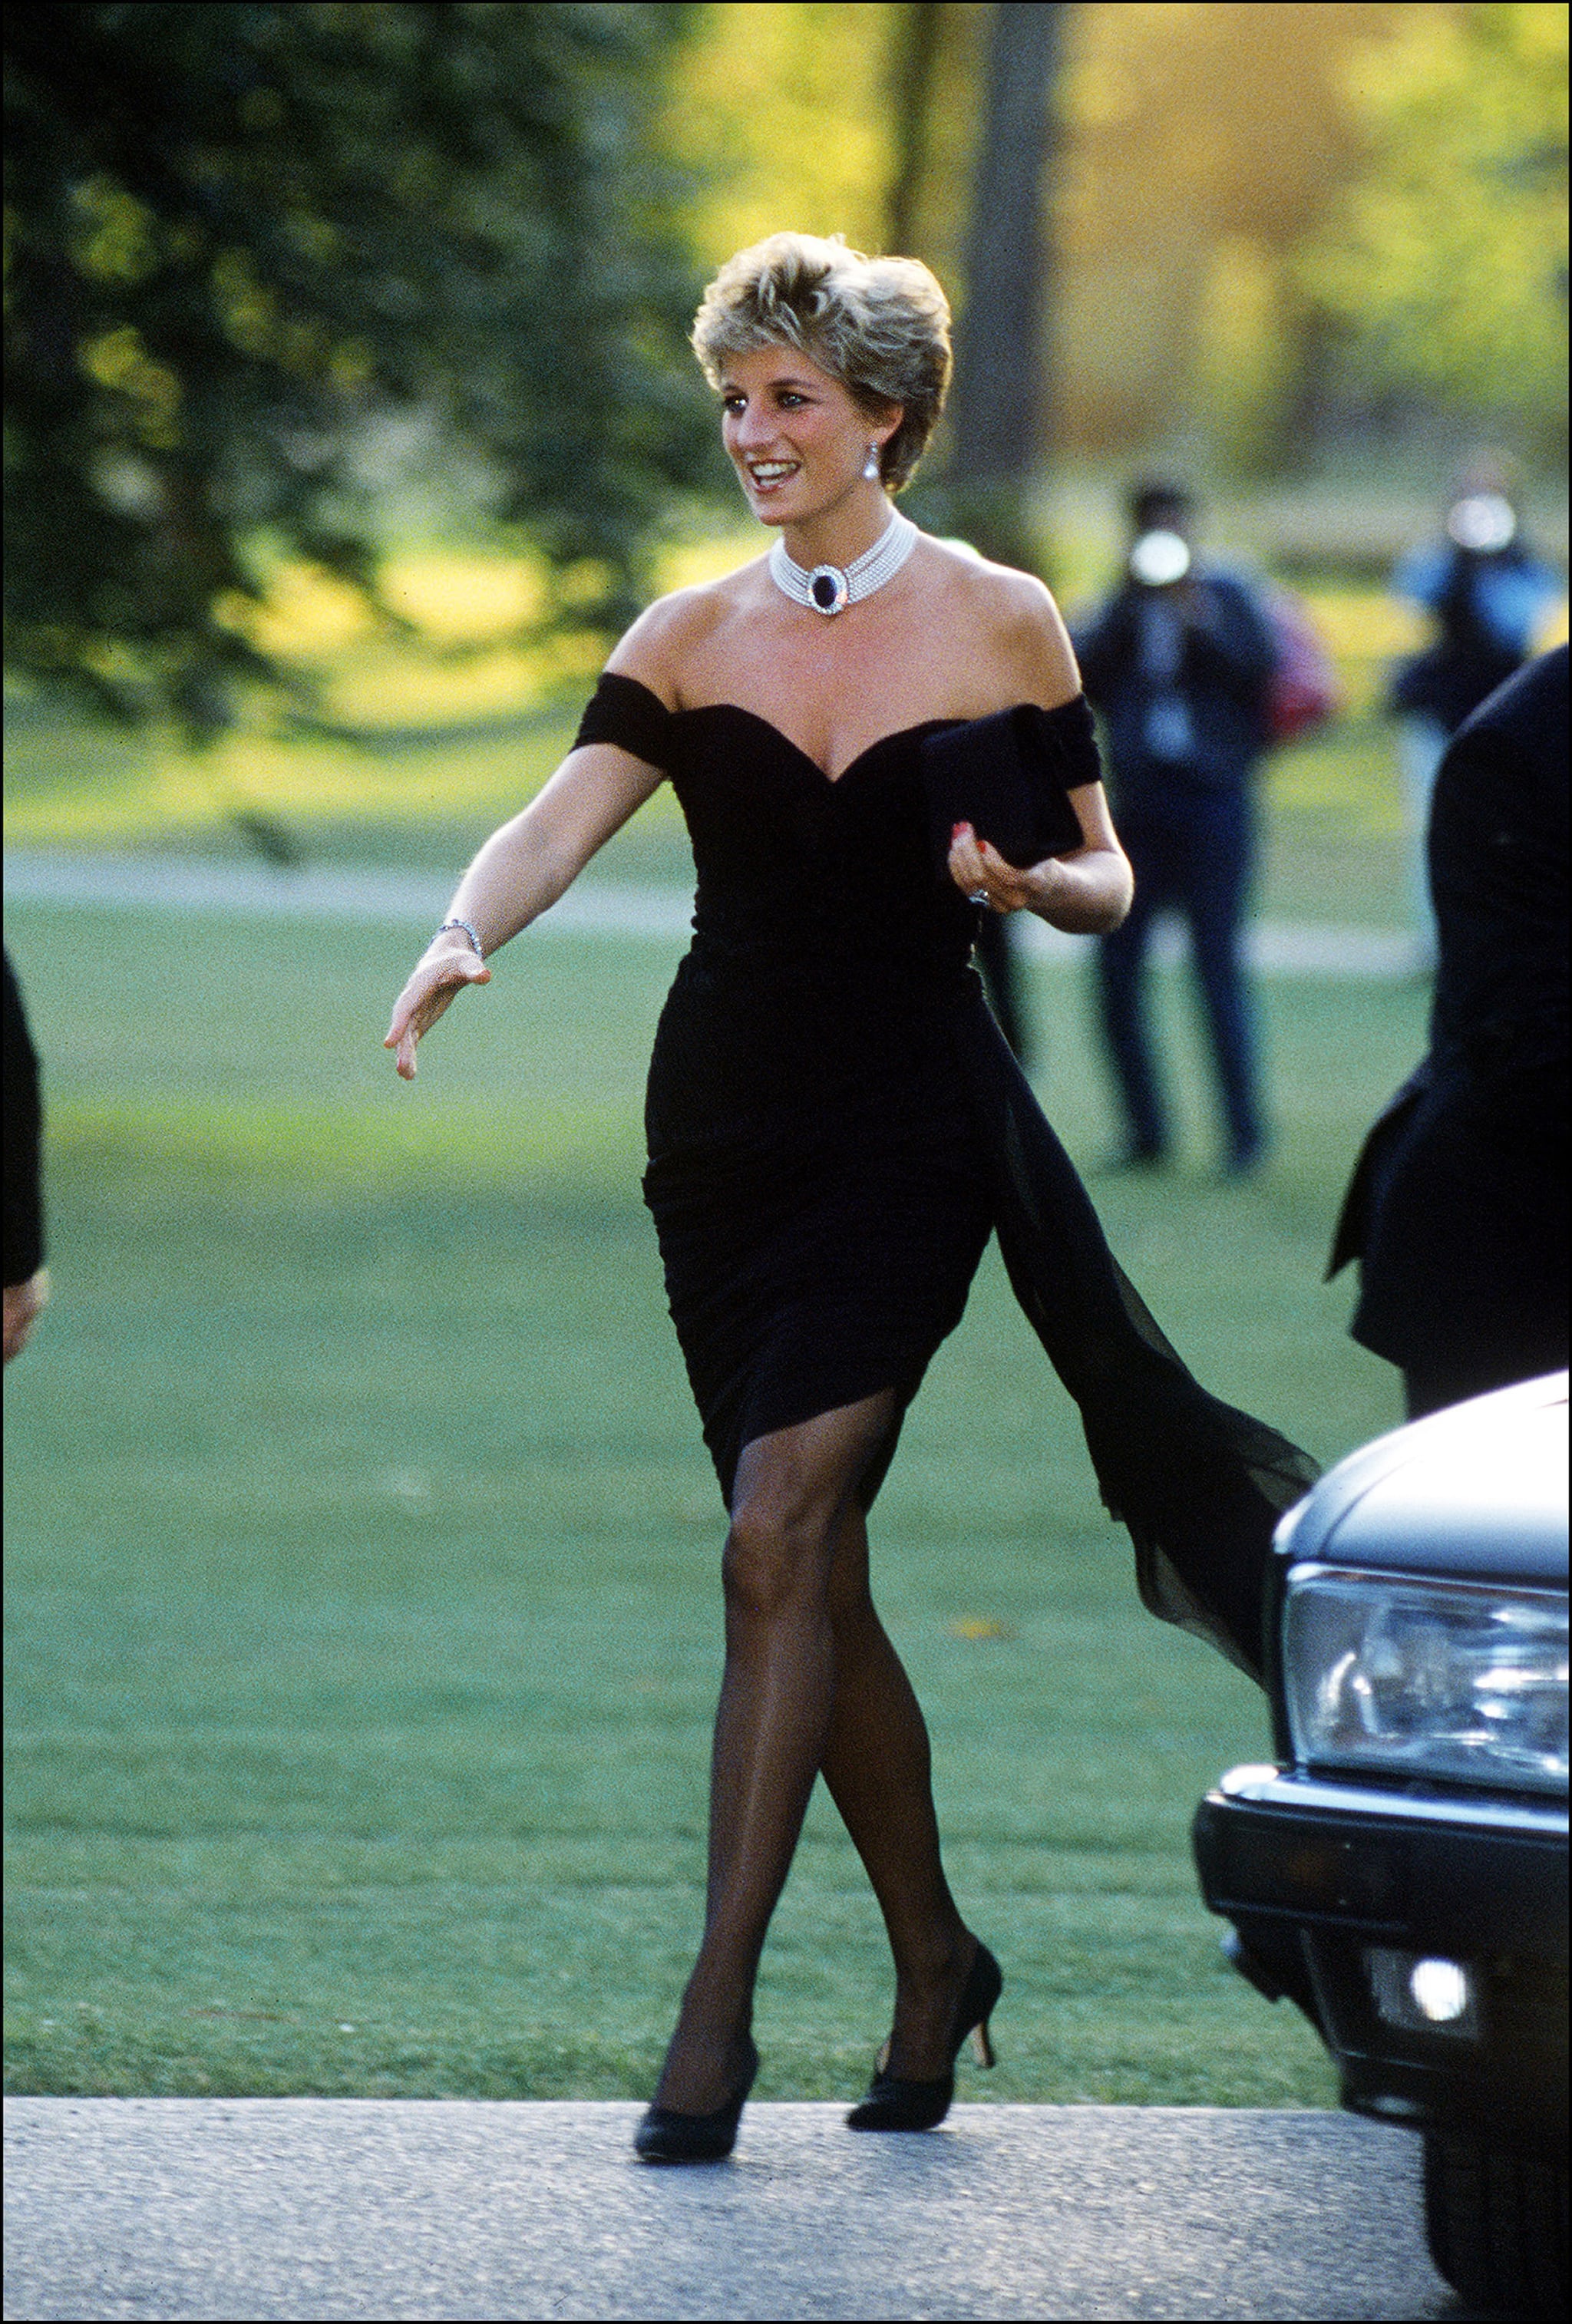 7 beauty tips to steal from Princess Diana